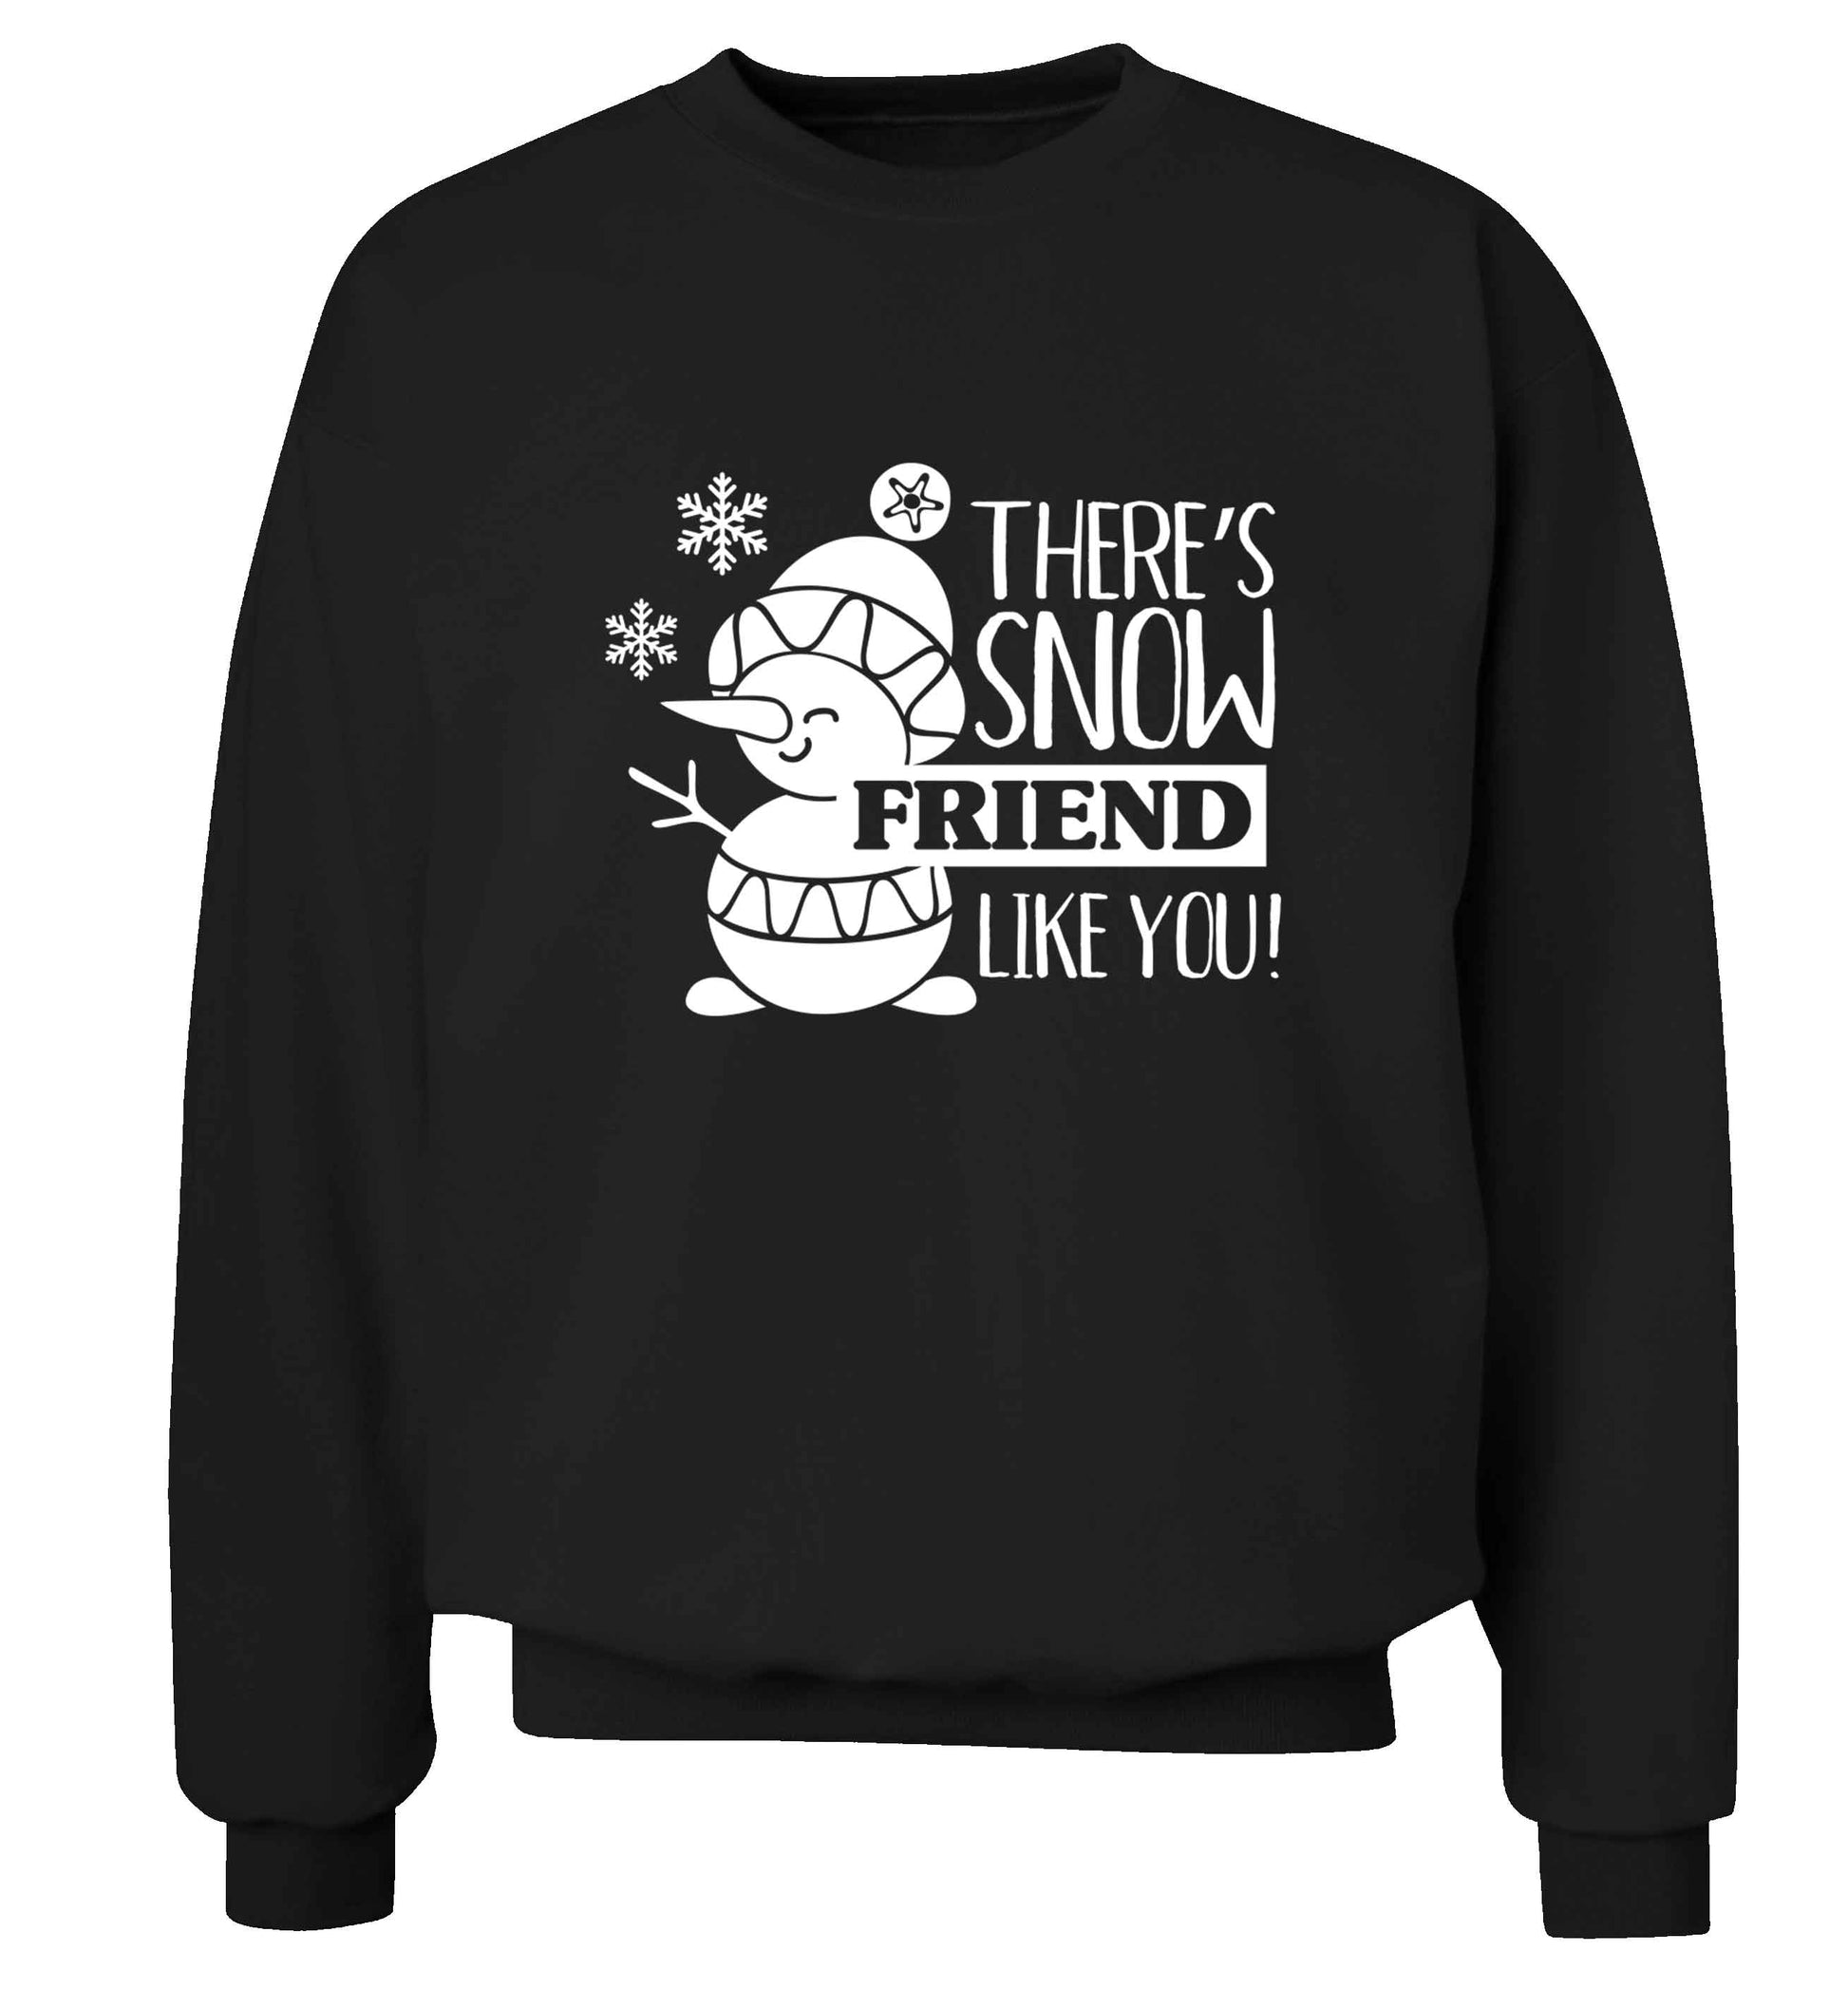 There's snow friend like you adult's unisex black sweater 2XL